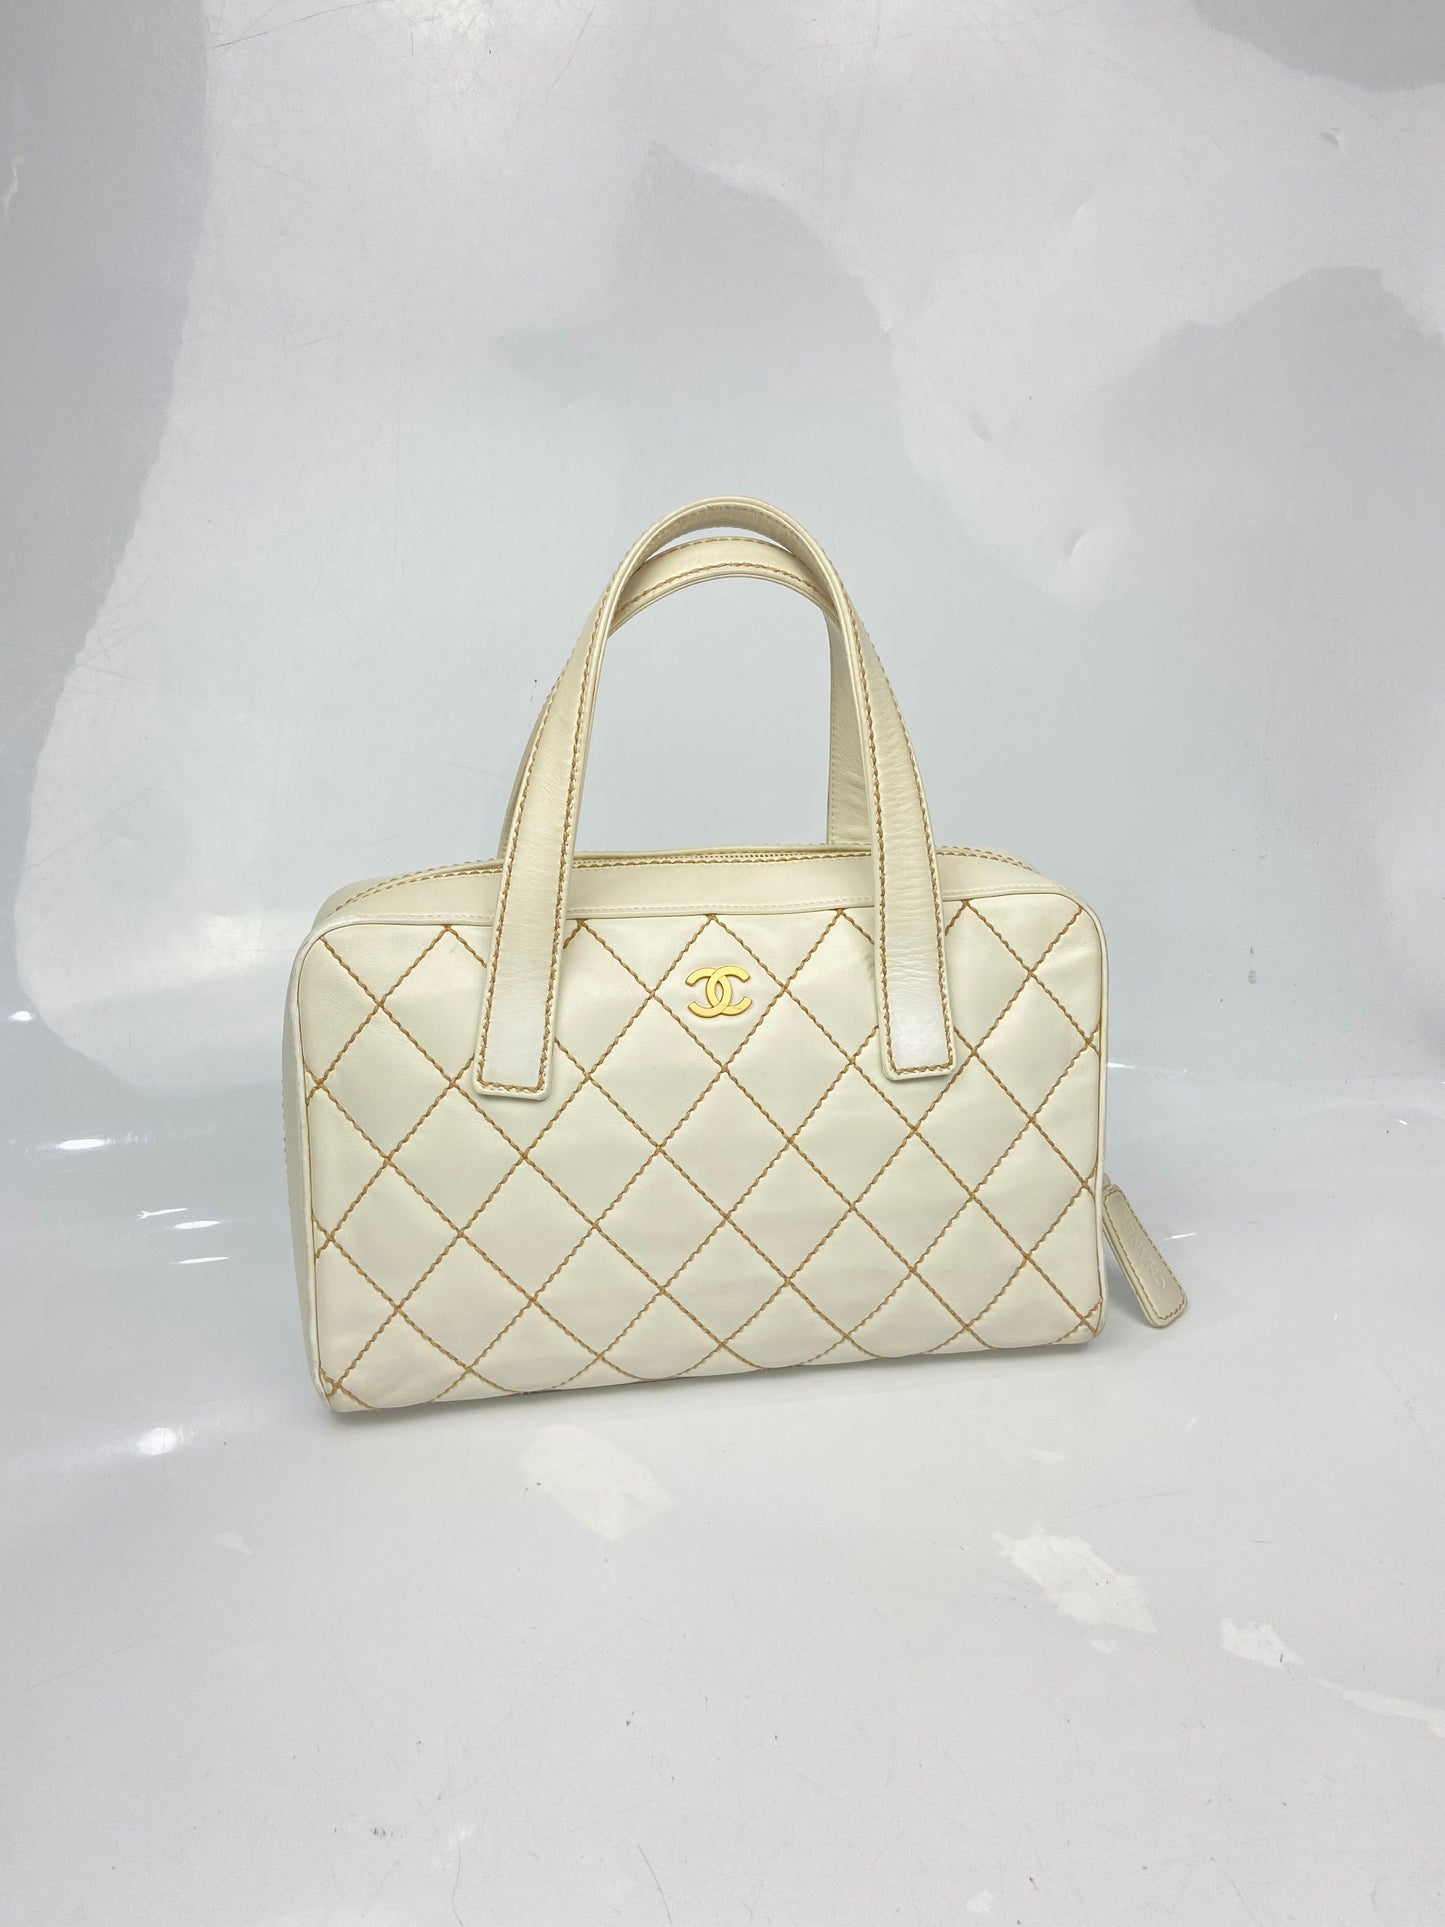 Chanel Wild Stitch Leather Quilted Tote